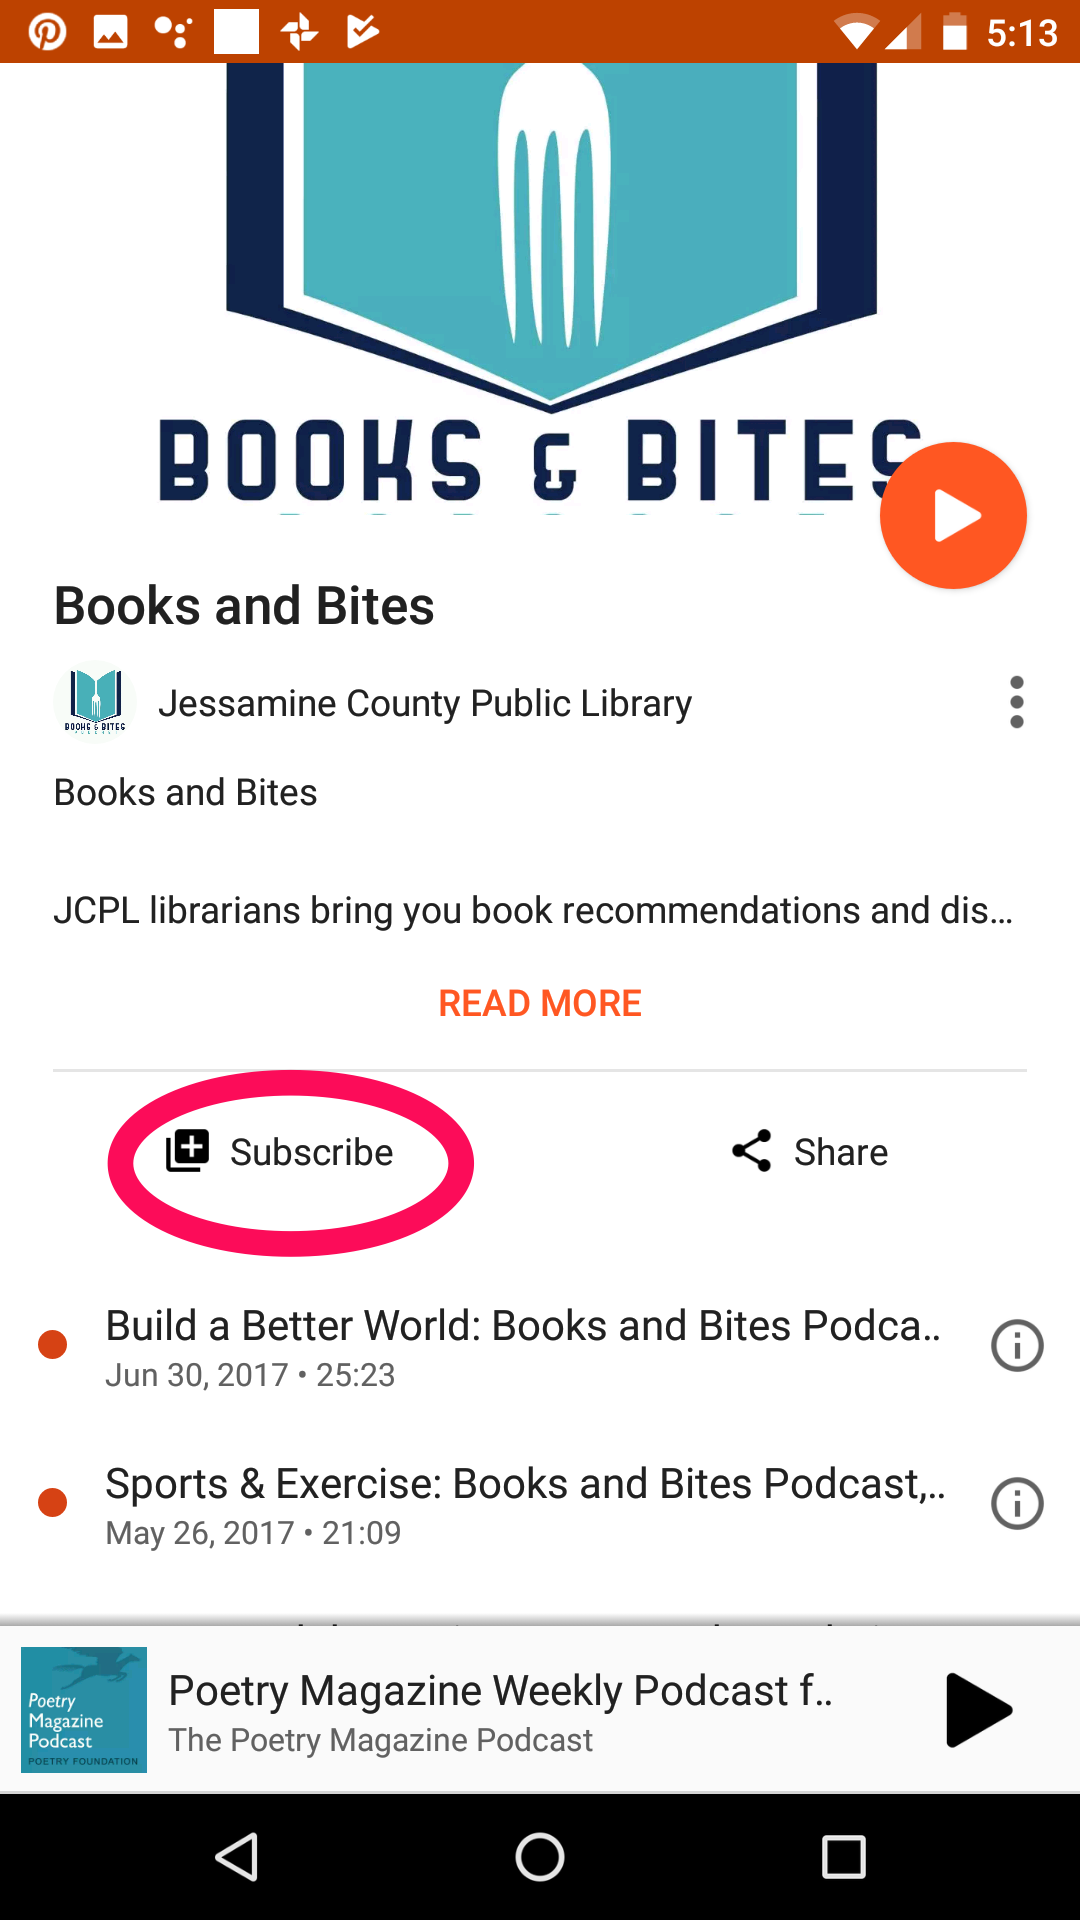 Screenshot showing how to subscribe to Books and Bites